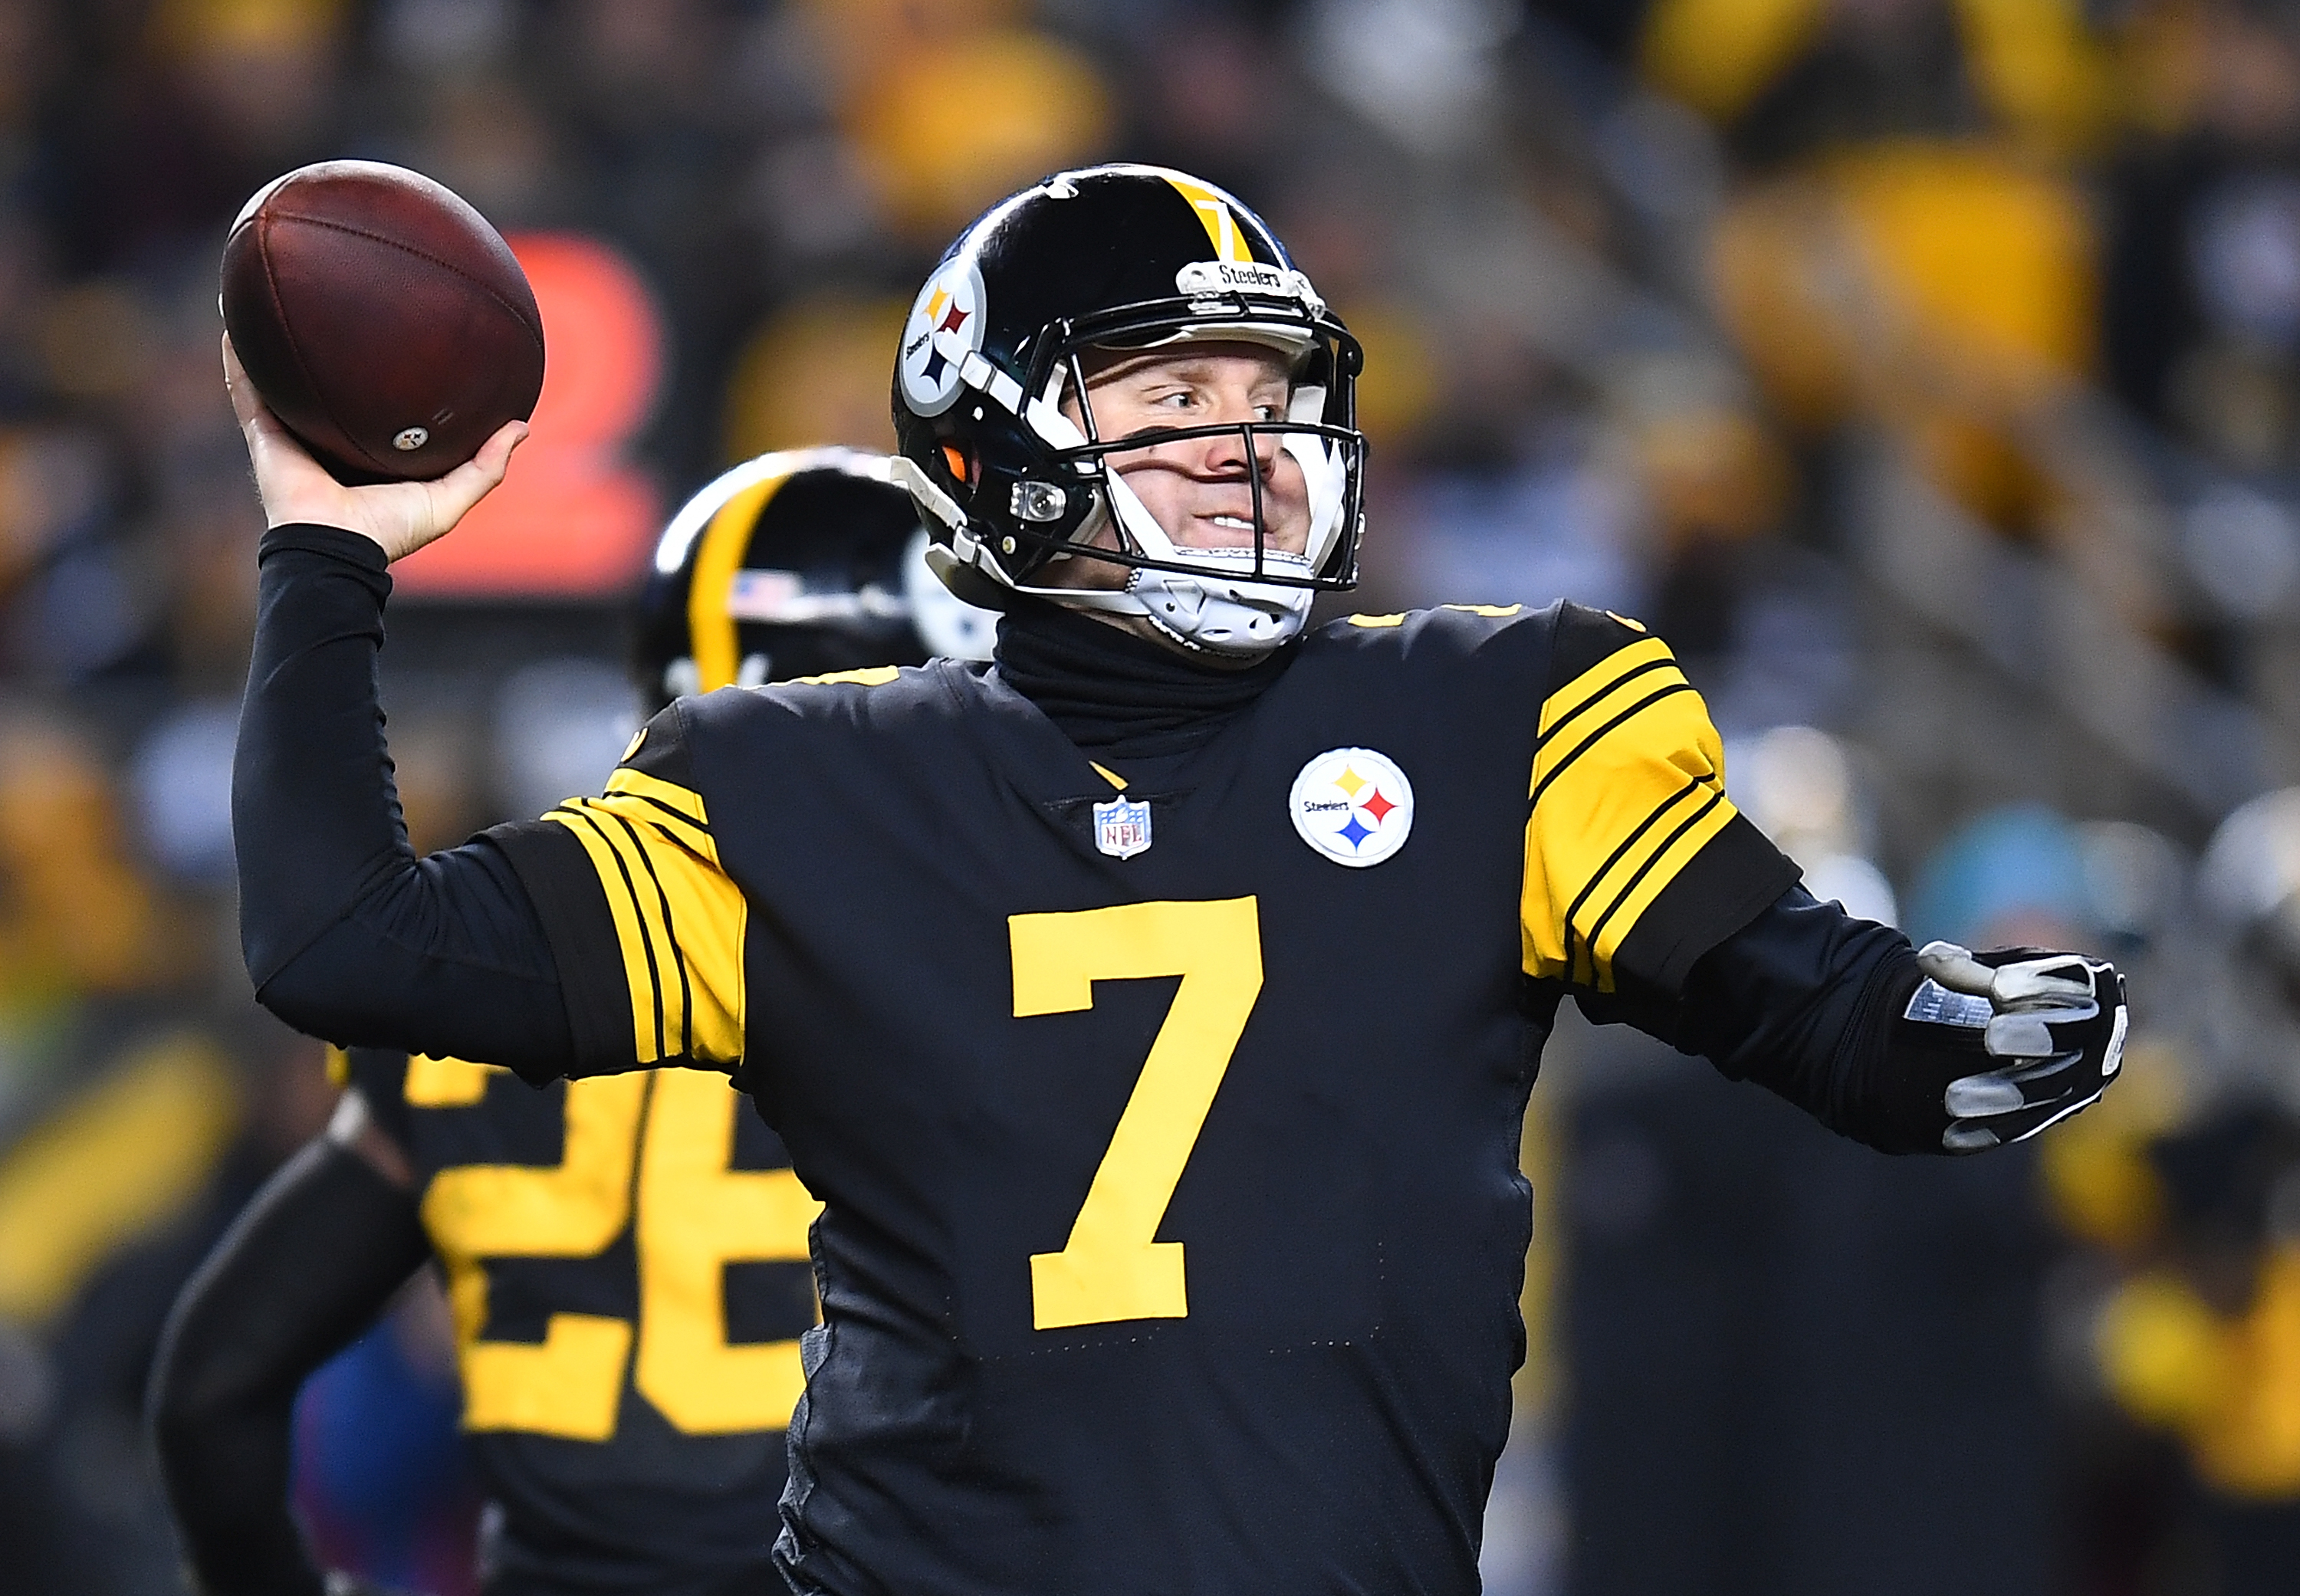 football in with ben roethlisberger